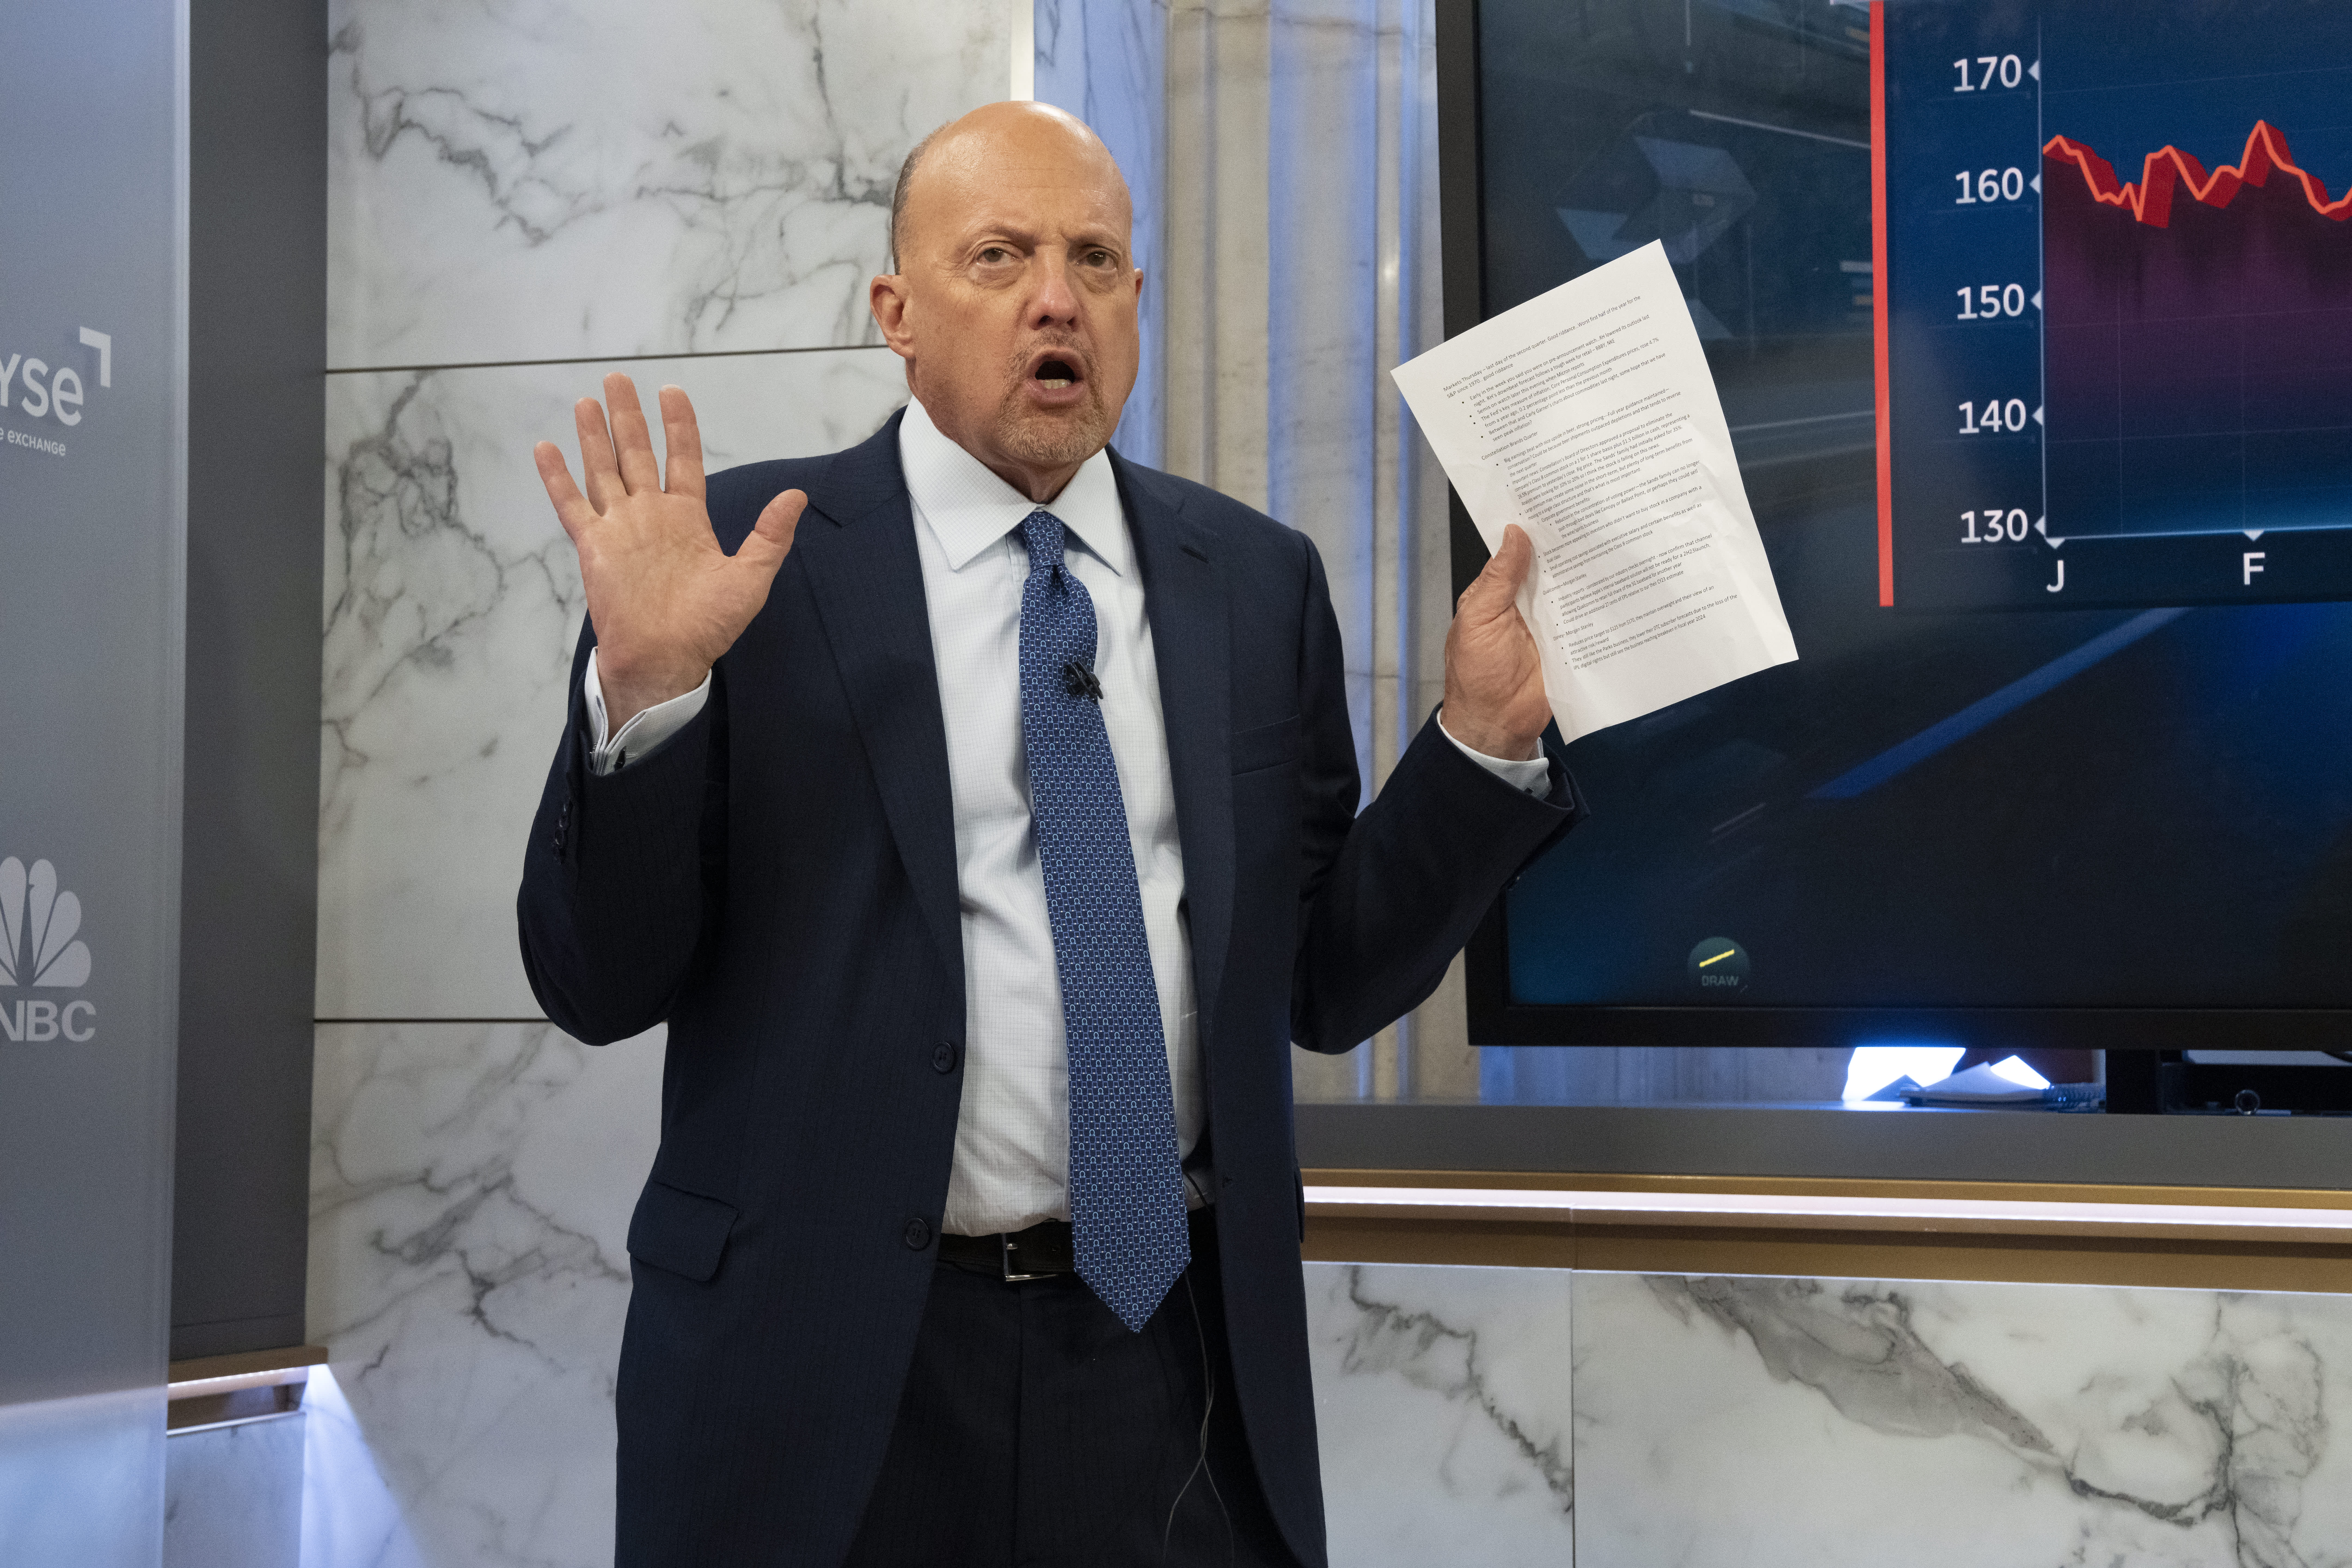 Jim Cramer Investment Club meeting Friday: Hot jobs report, Marvell earnings read